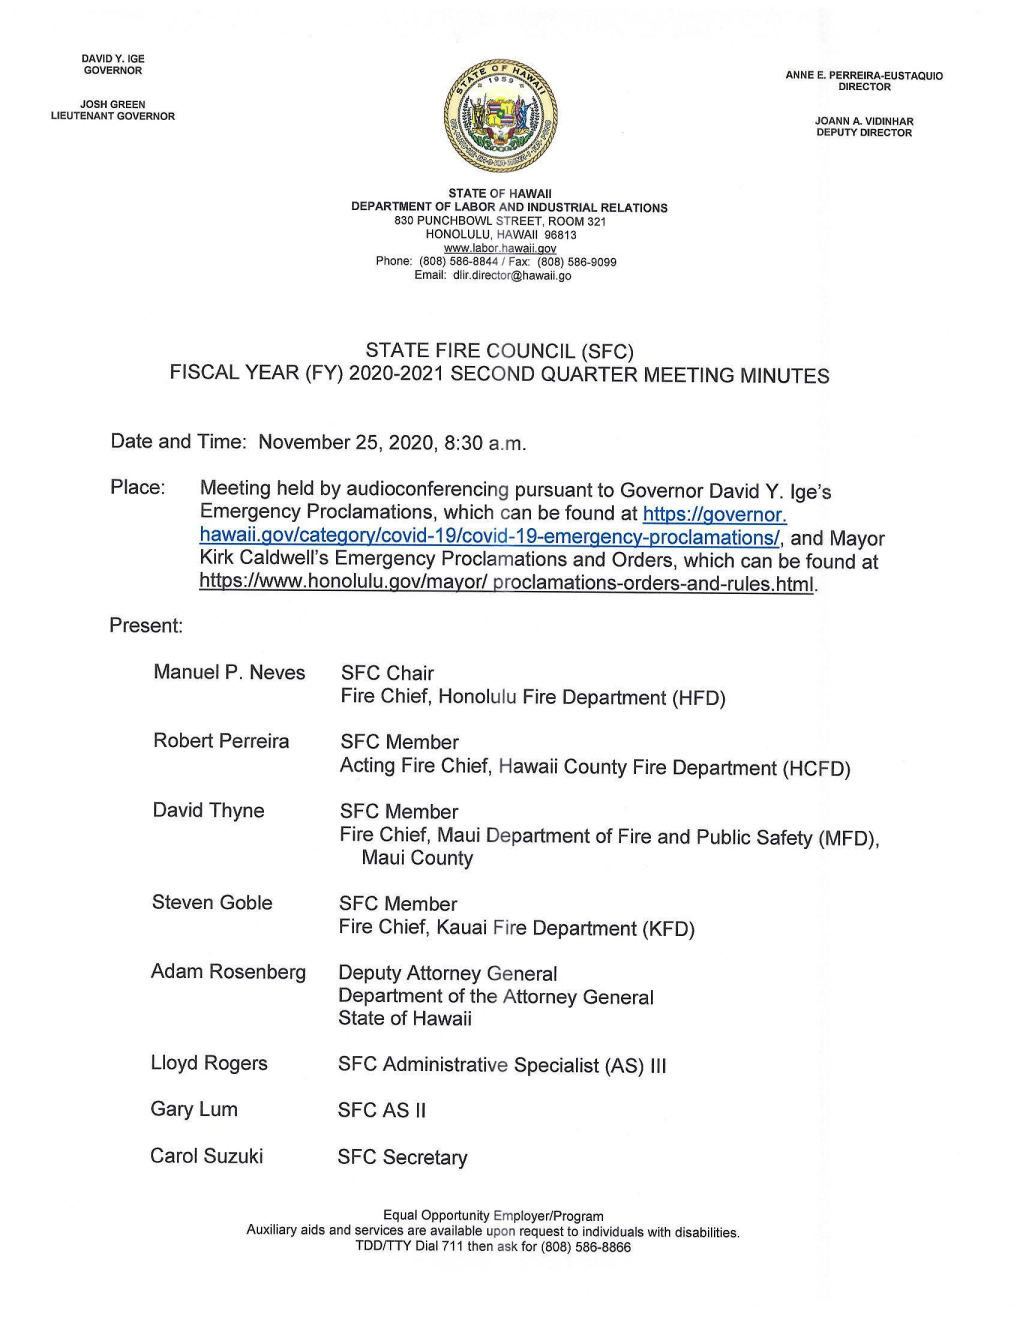 State Fire Council (Sfc) Fiscal Year (Fy) 2020-2021 Second Quarter Meeting Minutes